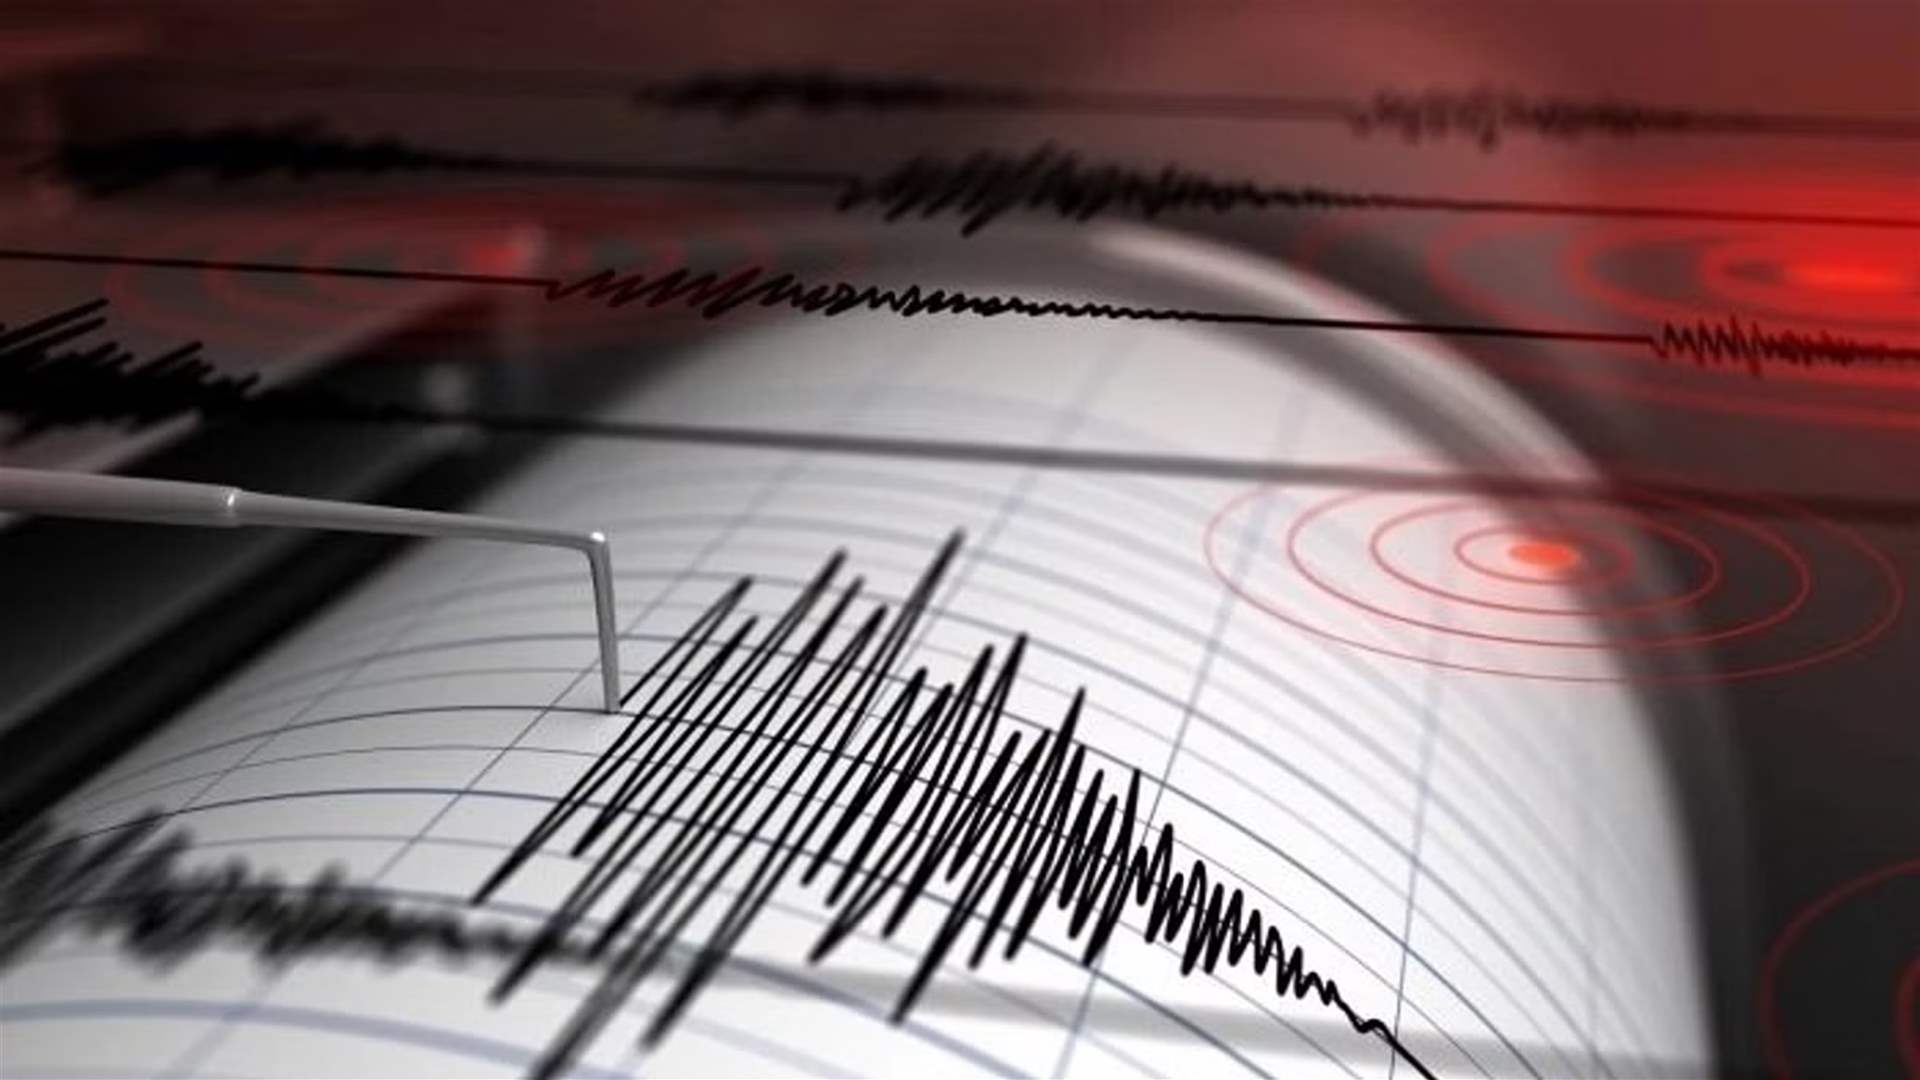 Earthquake with preliminary magnitude of 6.4 hit southern Japan 